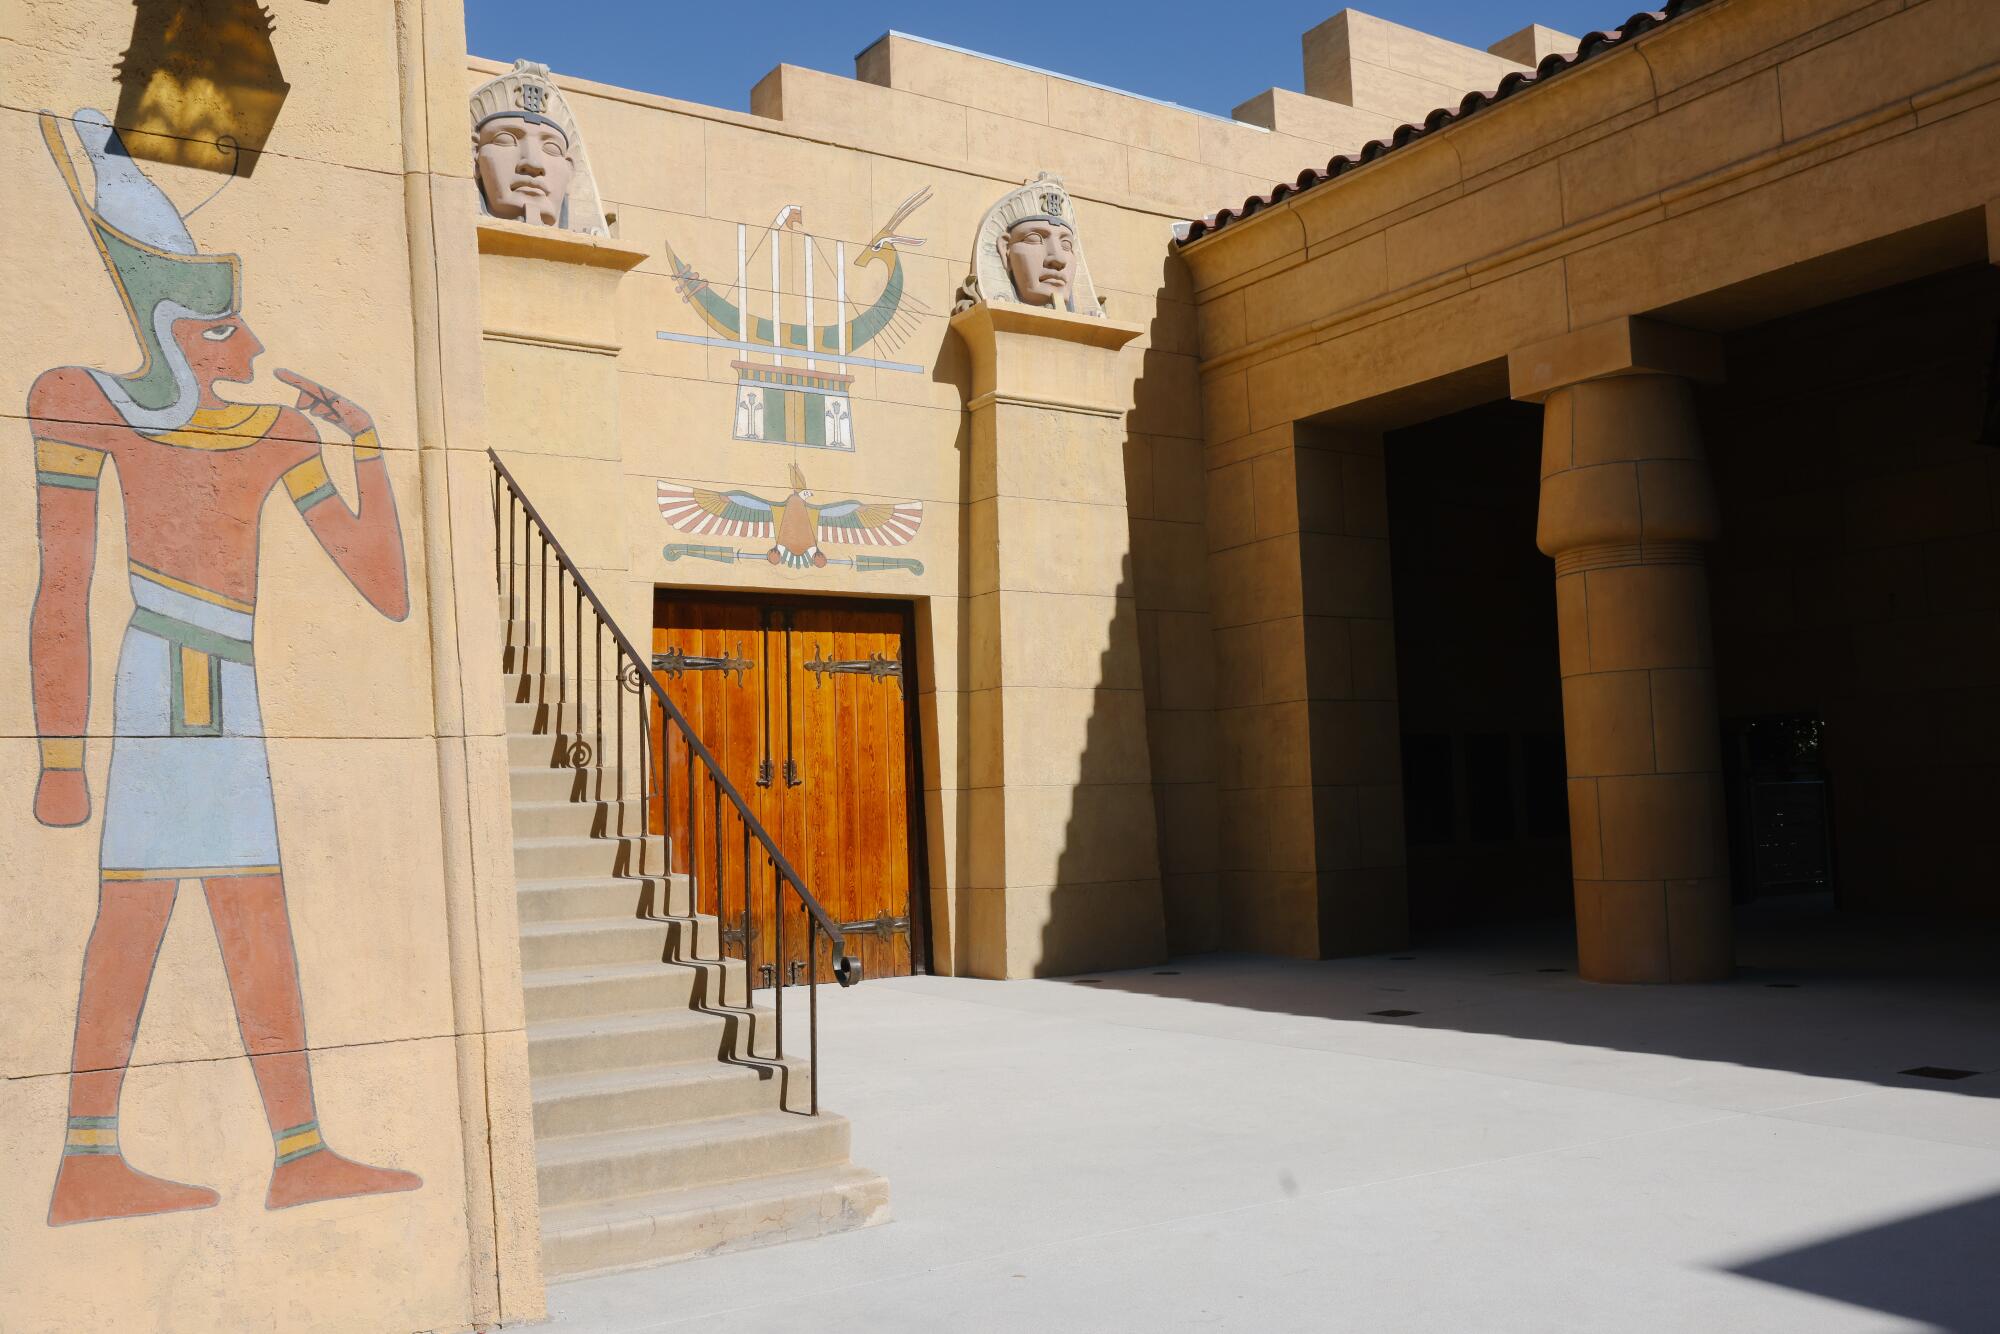 The Egyptian Theatre's forecourt has been restored with painted images and hieroglyphics.